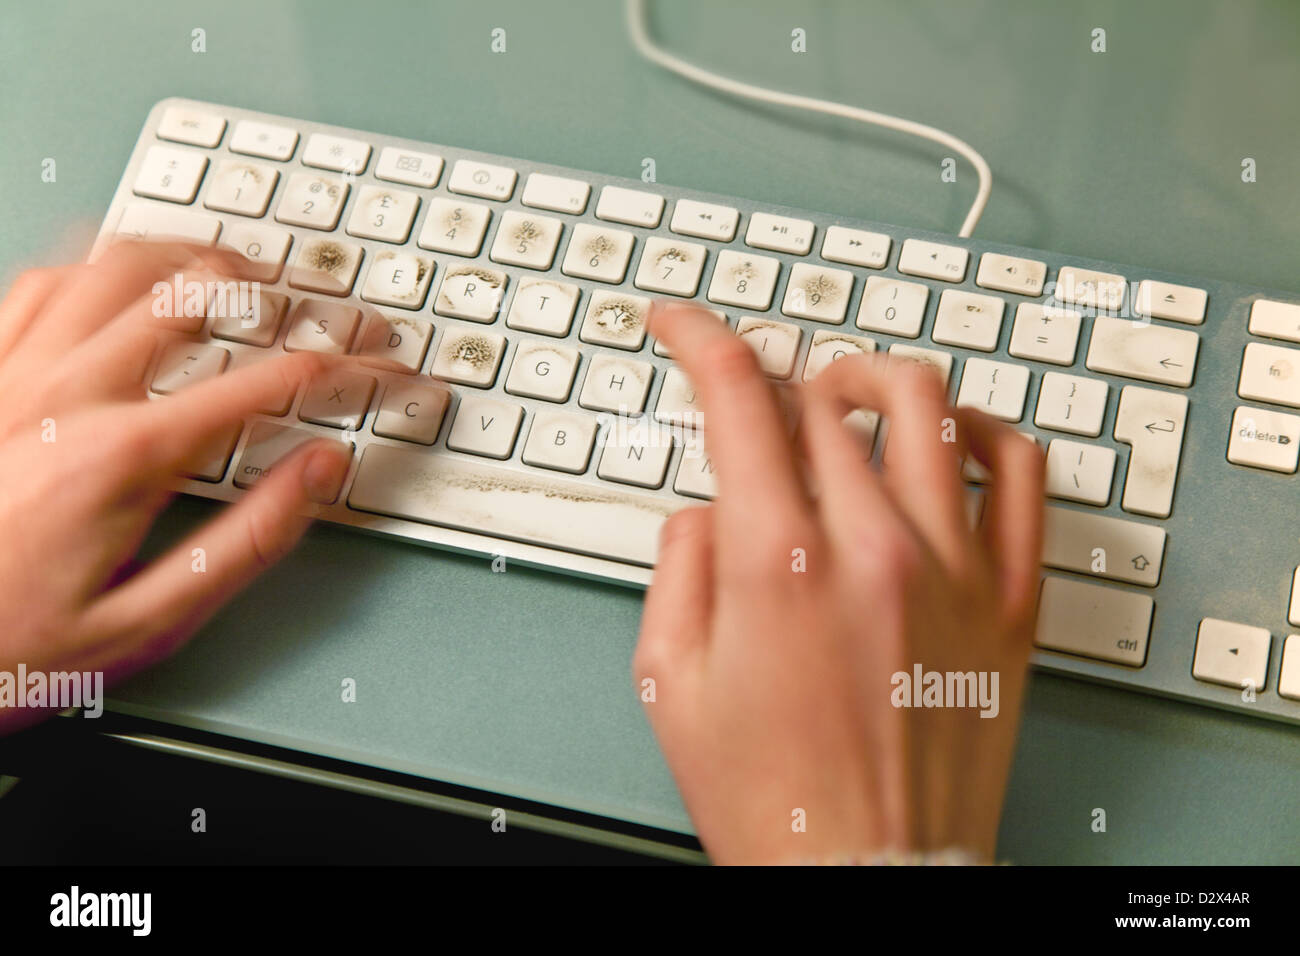 Blurred fingers typing on a dirty computer keyboard Stock Photo